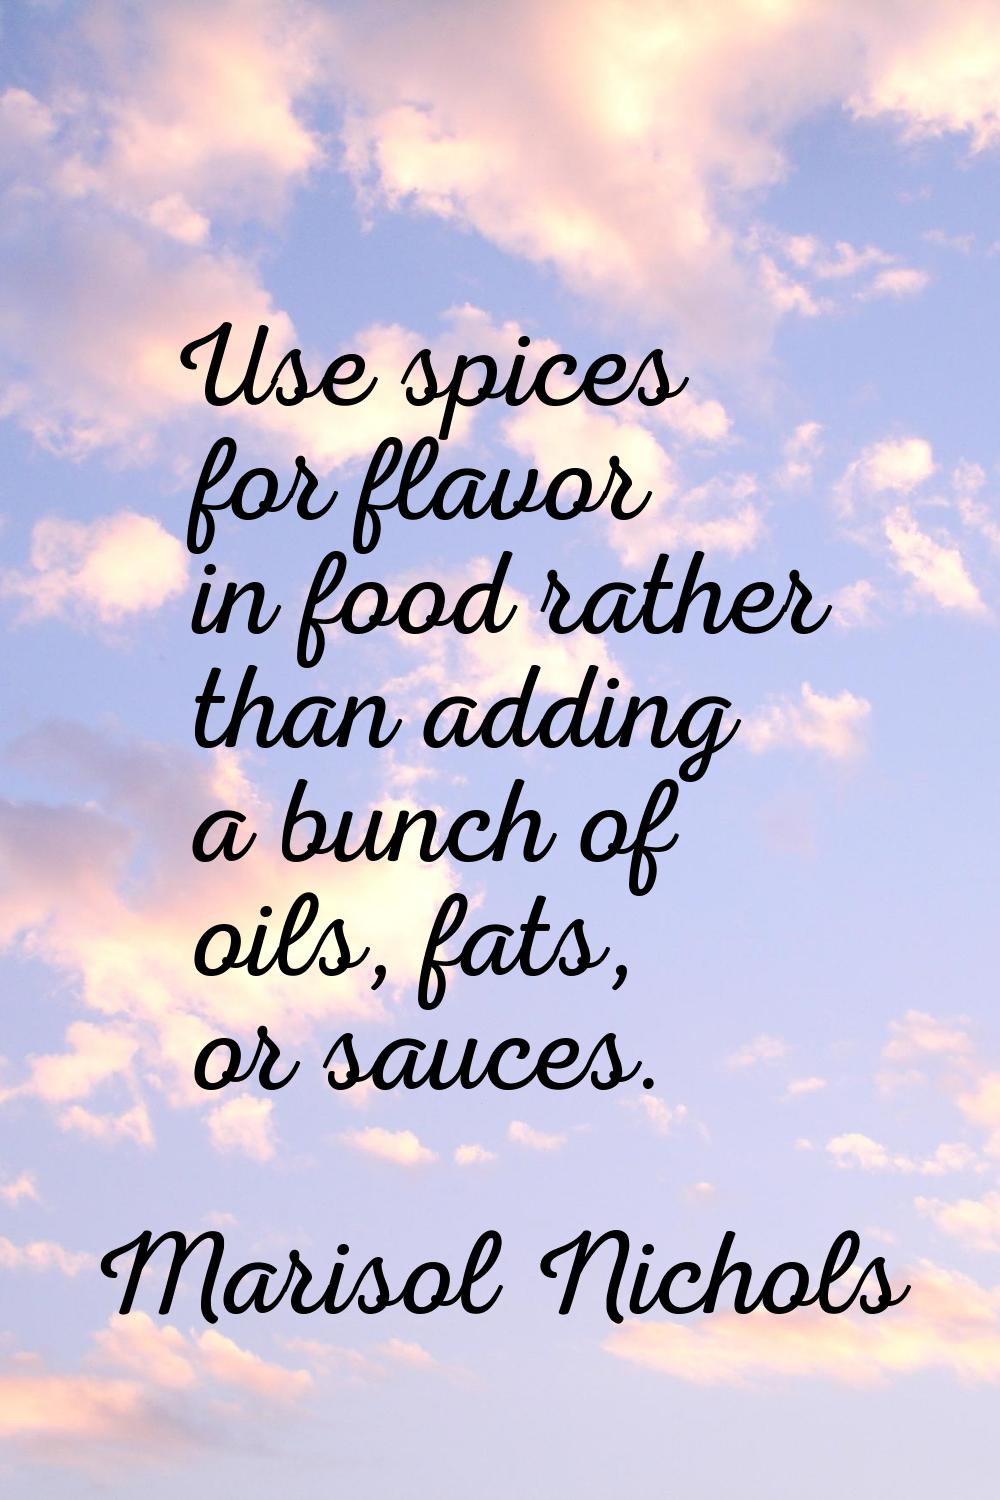 Use spices for flavor in food rather than adding a bunch of oils, fats, or sauces.